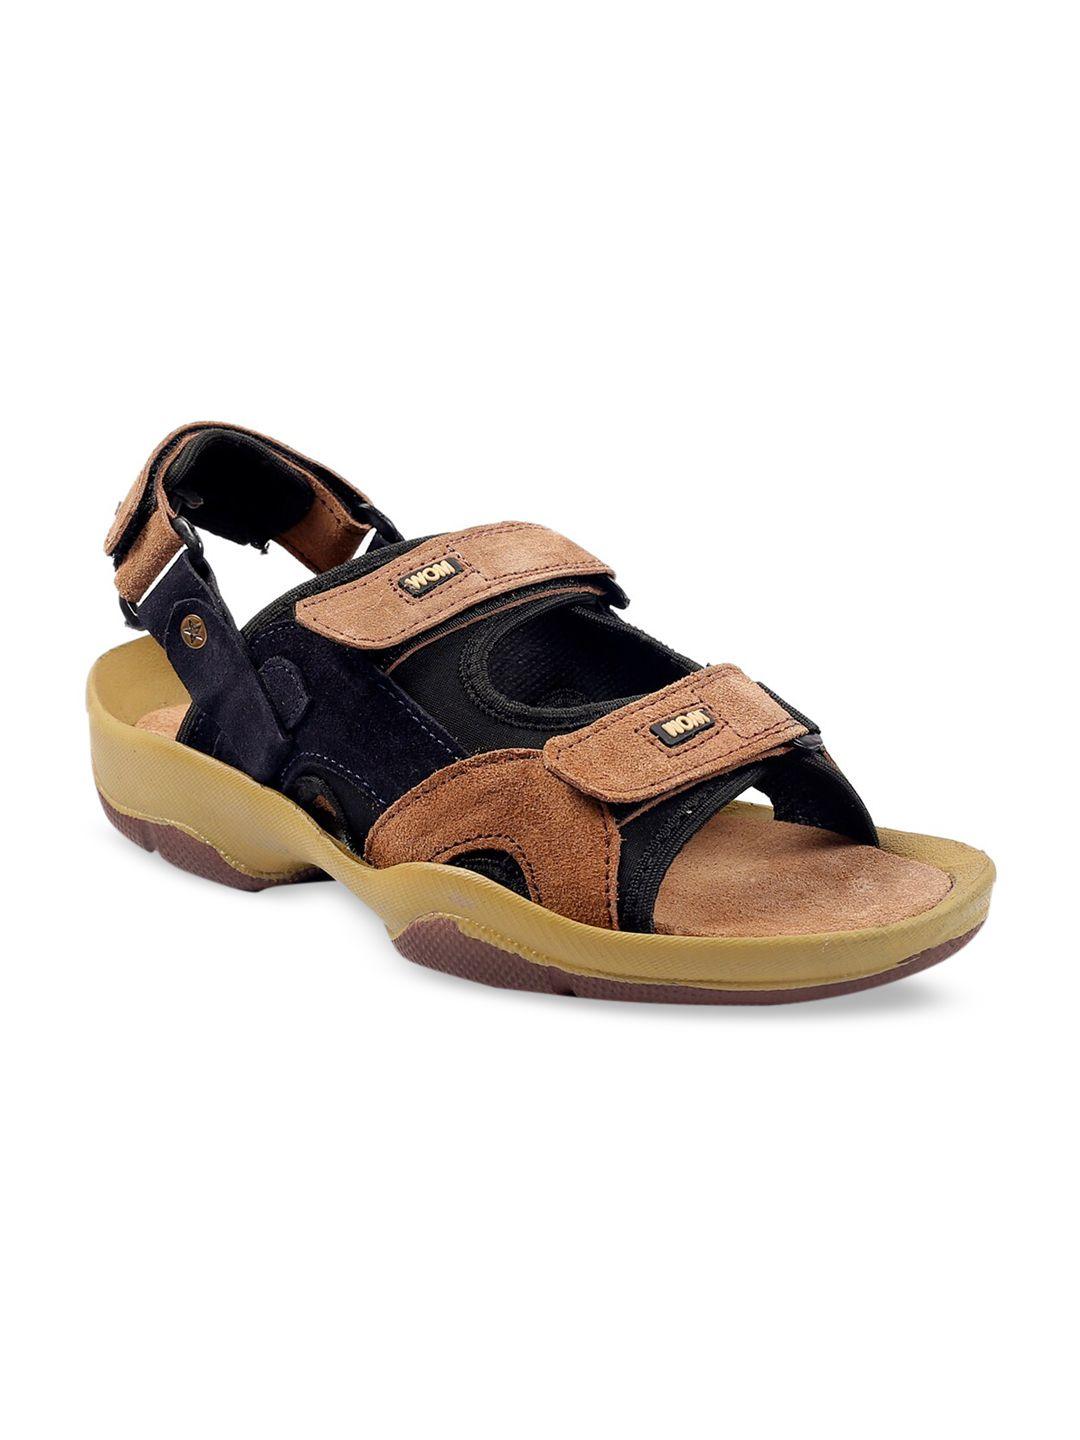 woakers men tan brown solid leather sports sandals